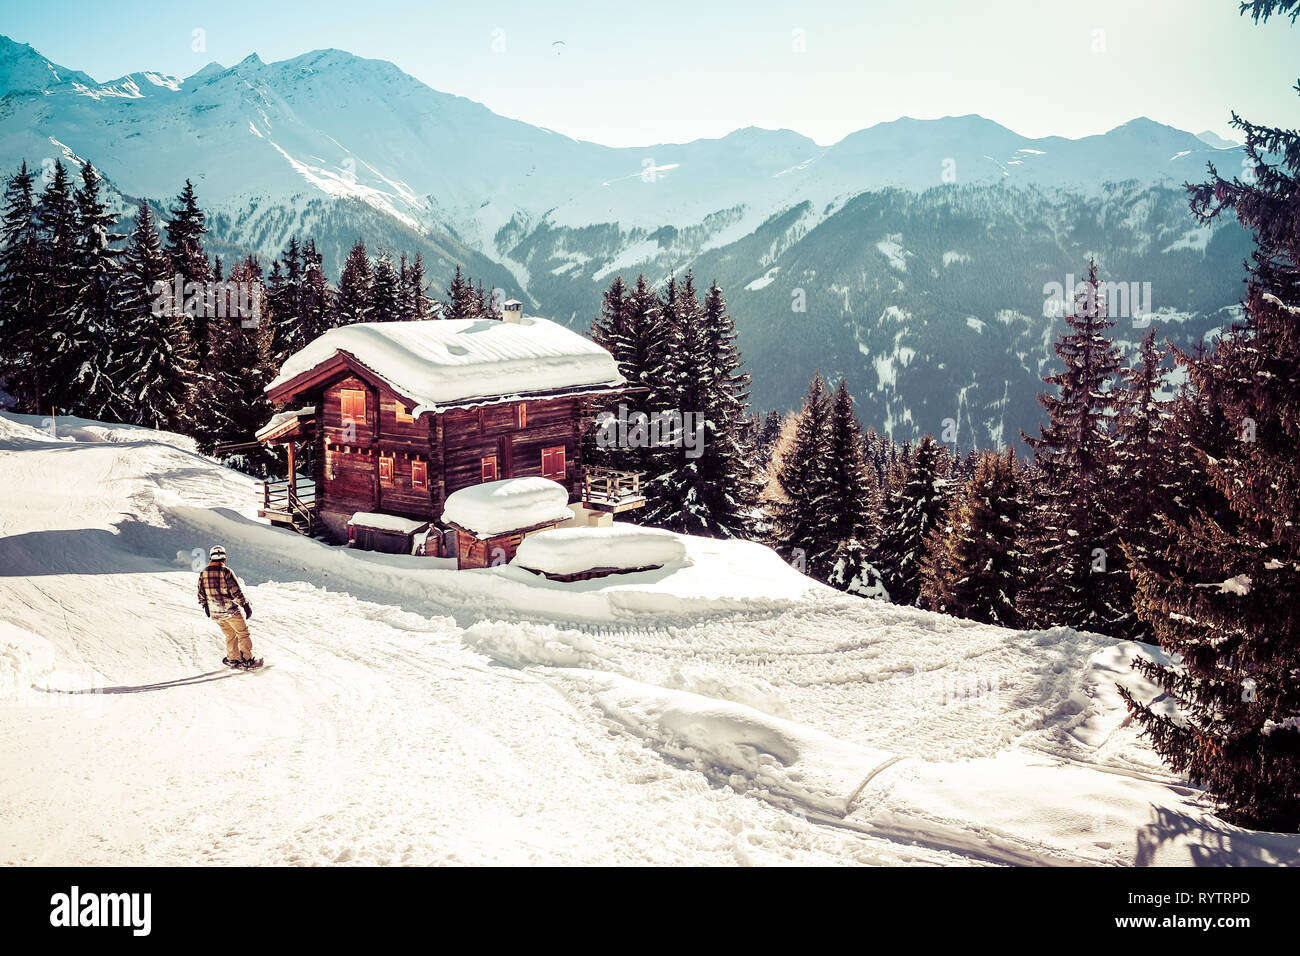 Landscape view of the slopes of the ski resort of Verbier in Switzerland, shot in winter 2019 Stock Photo